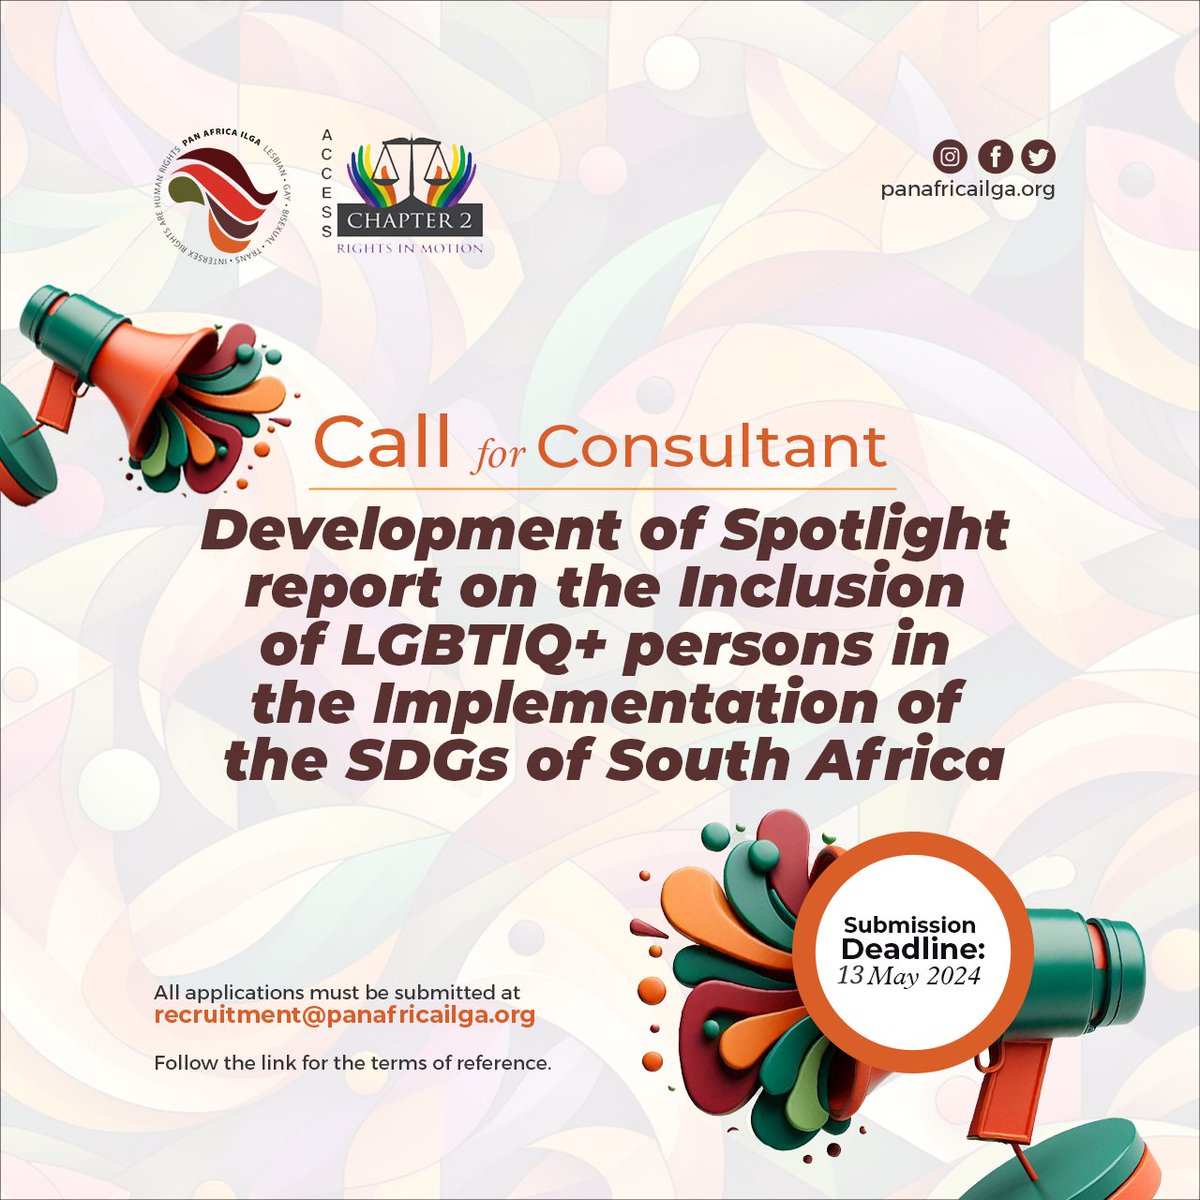 Call for Consultant: Development of spotlight report on the inclusion of LGBTIQ+ persons in the implementation of the SDGs of South Africa Deadline for submission: 13 May 2024 Follow the link for the terms of reference: tr.ee/oat0ni9bdO